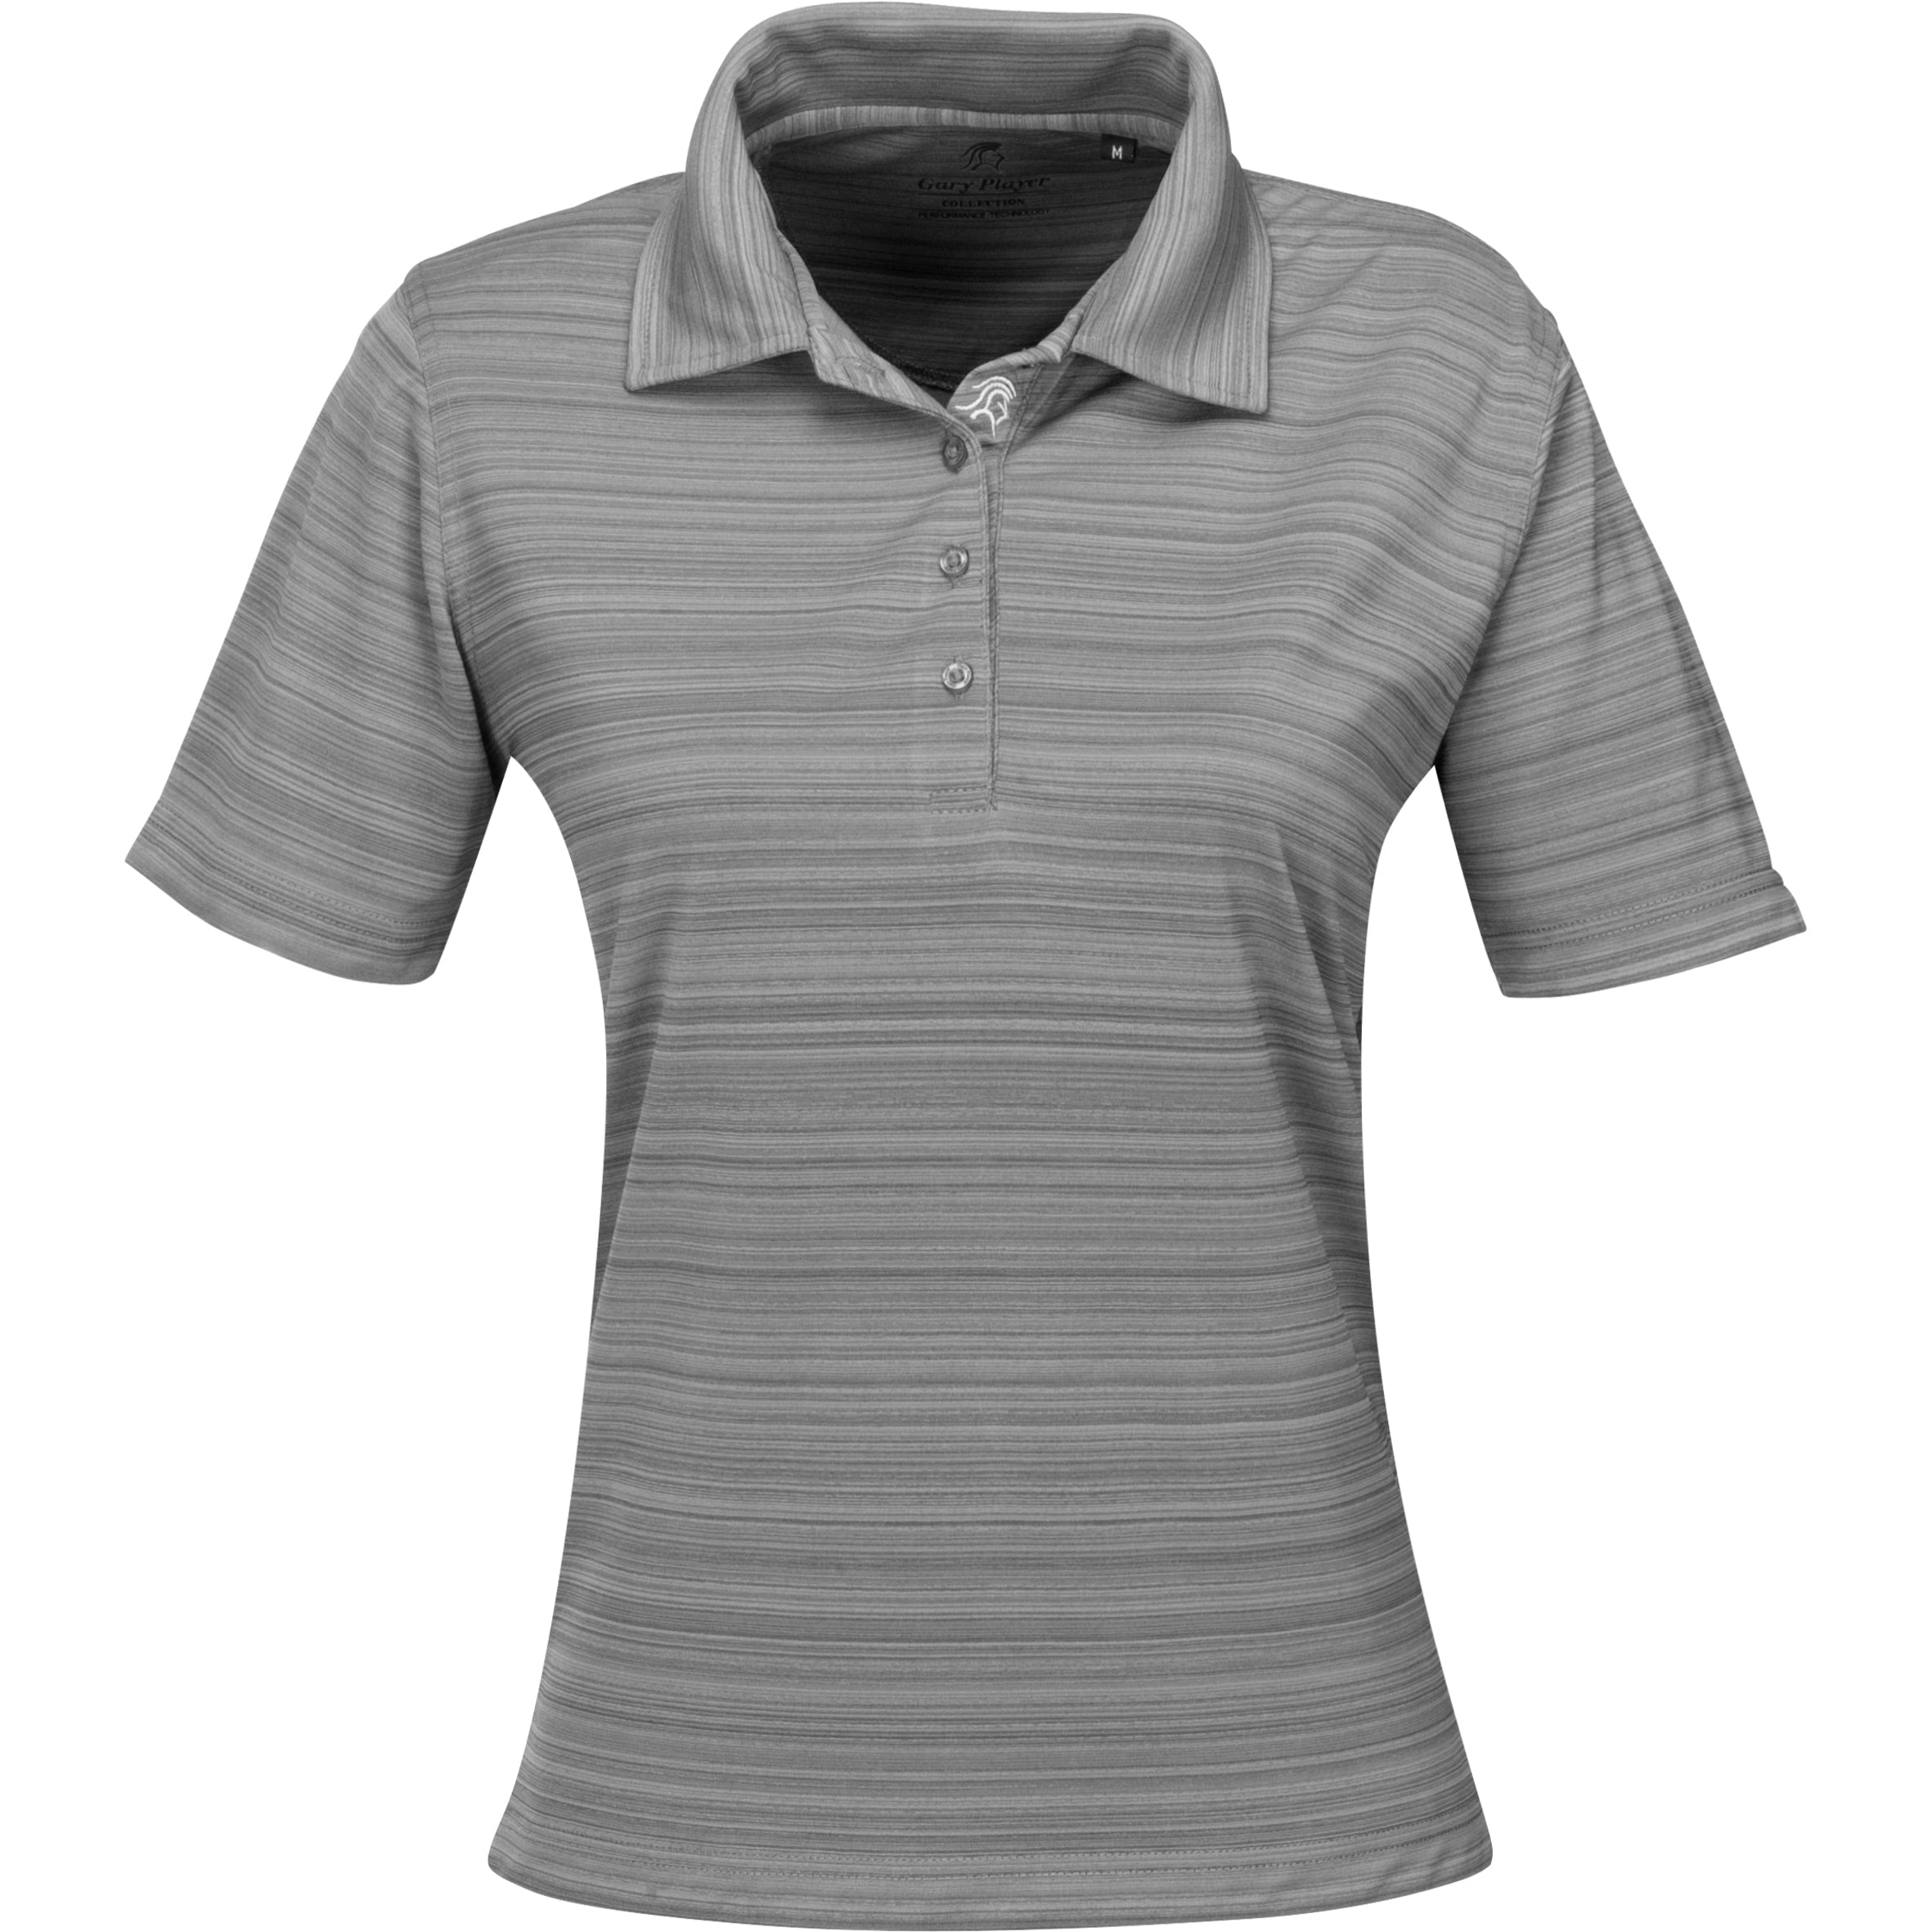 Ladies Astoria Golf Shirt - Lime Only-L-Grey-GY